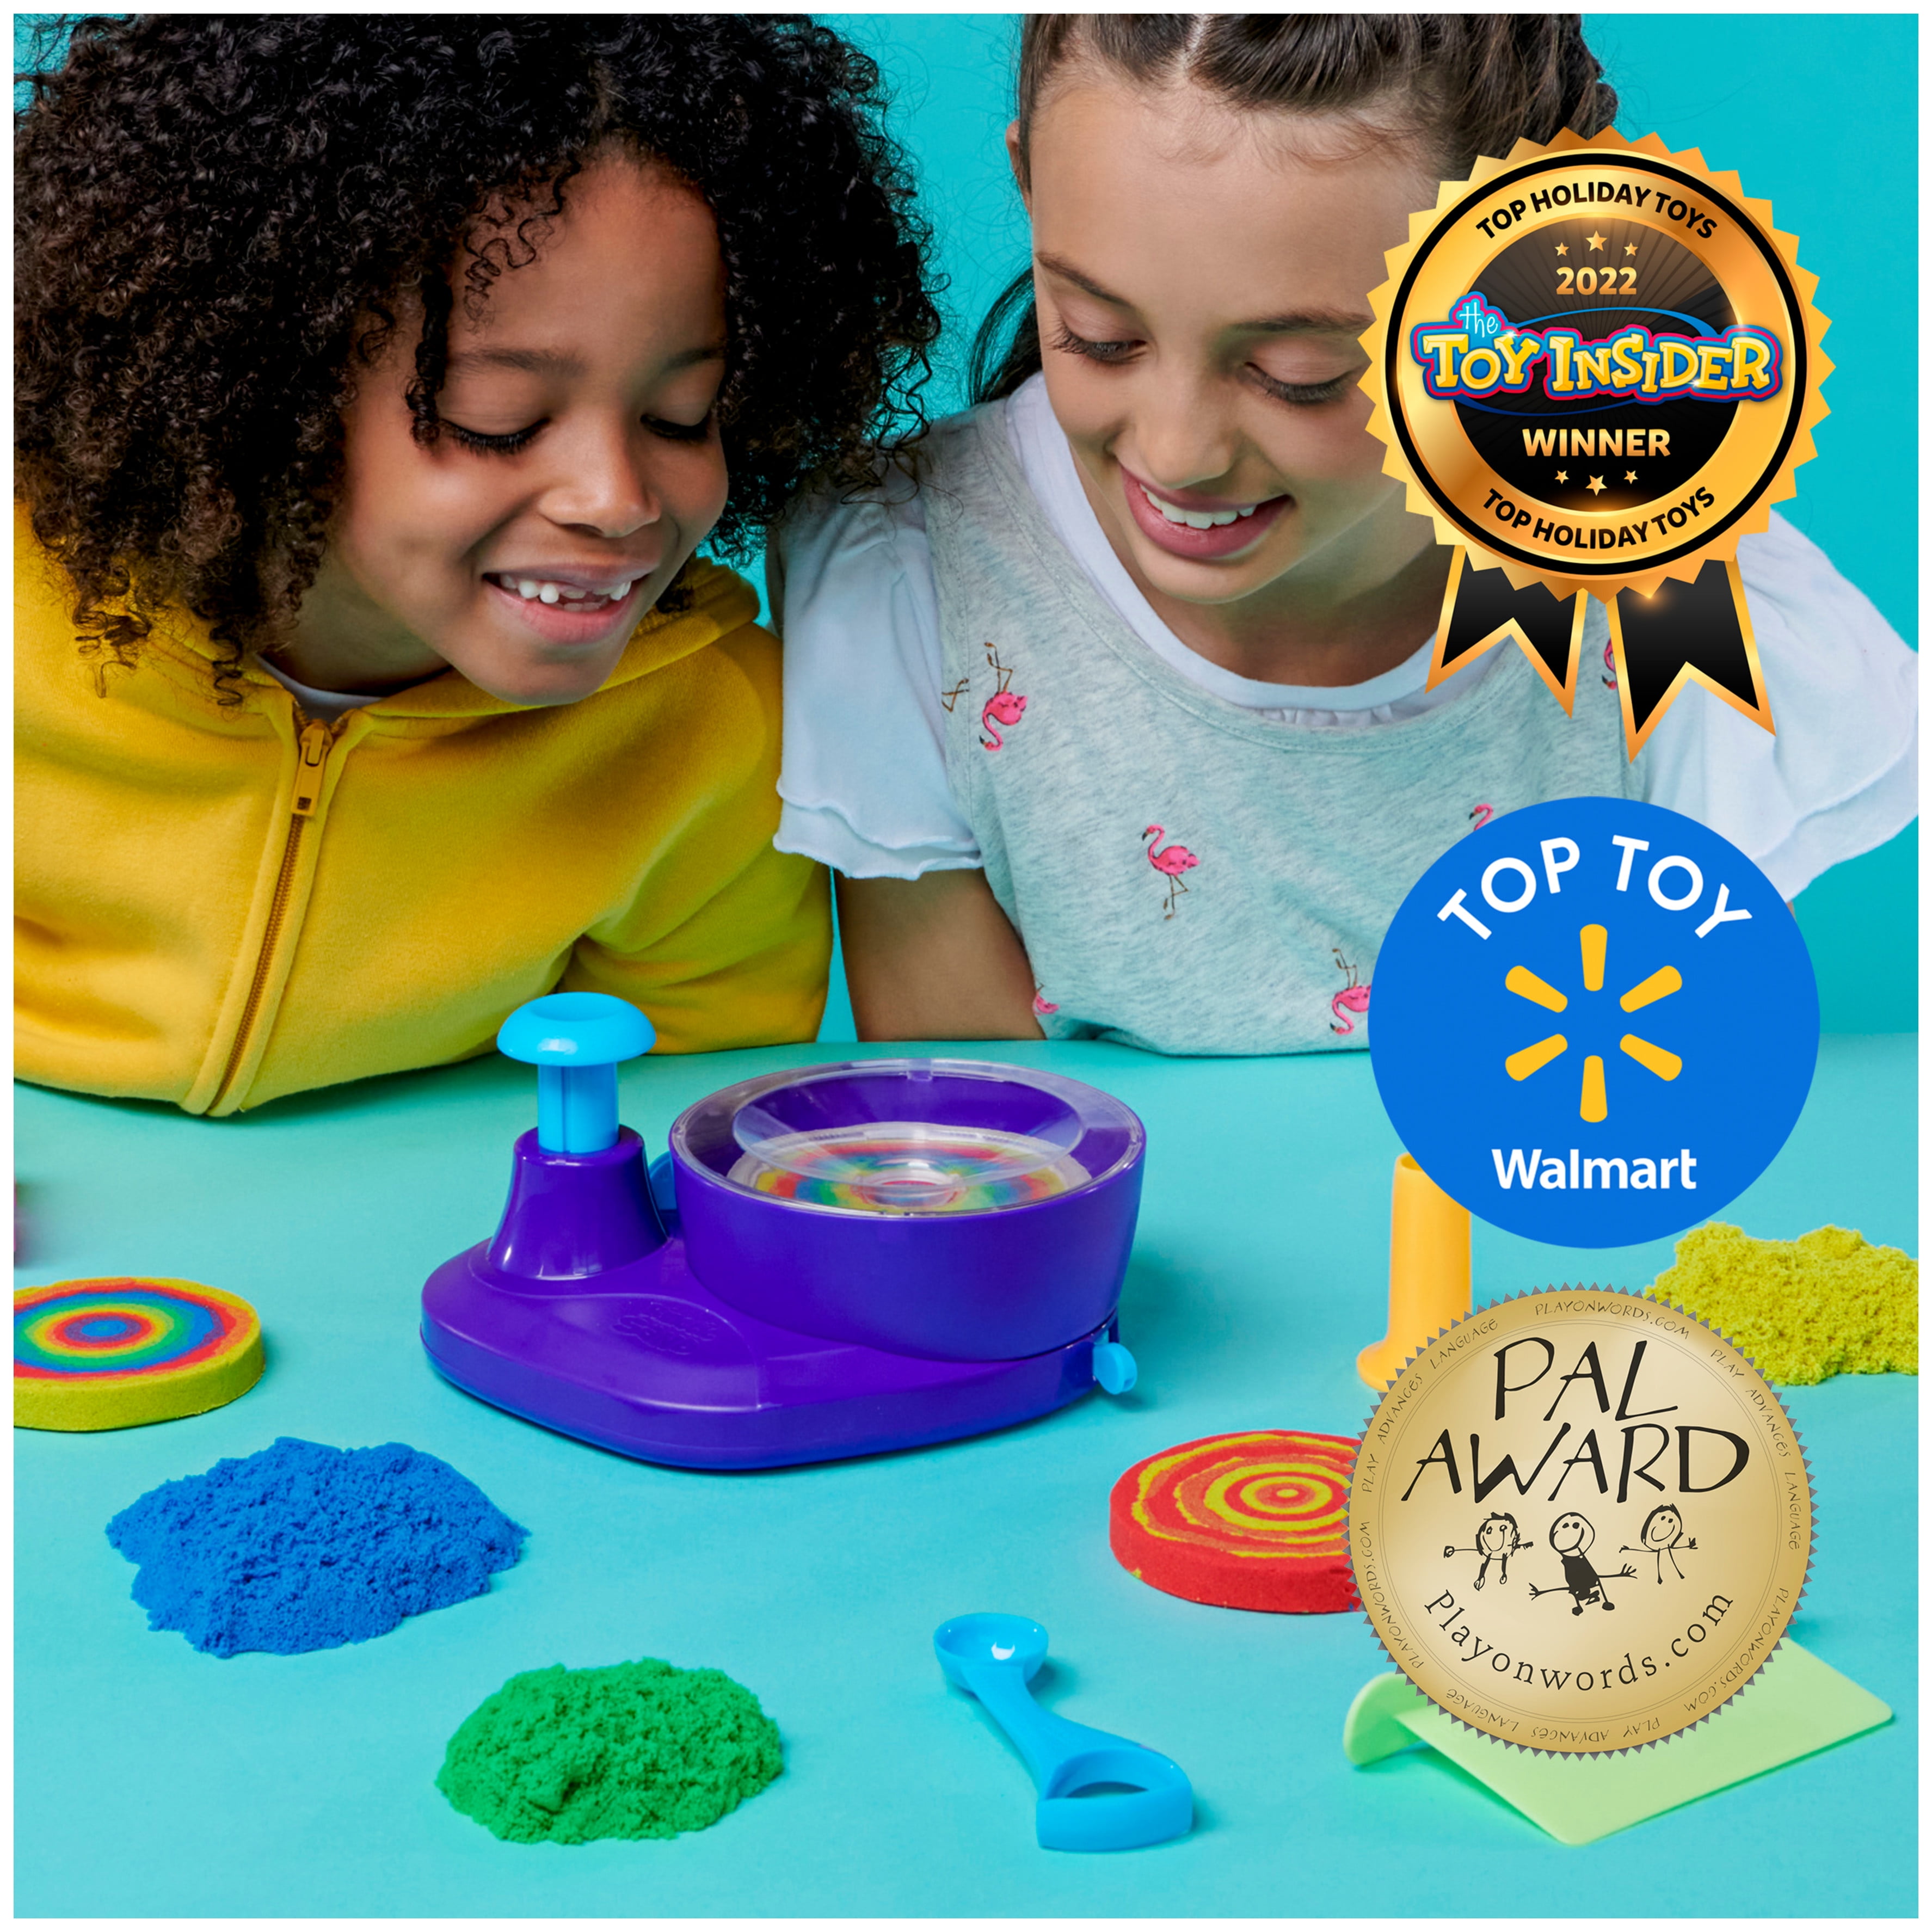 Kinetic Sand Swirl N Surprise – Awesome Toys Gifts